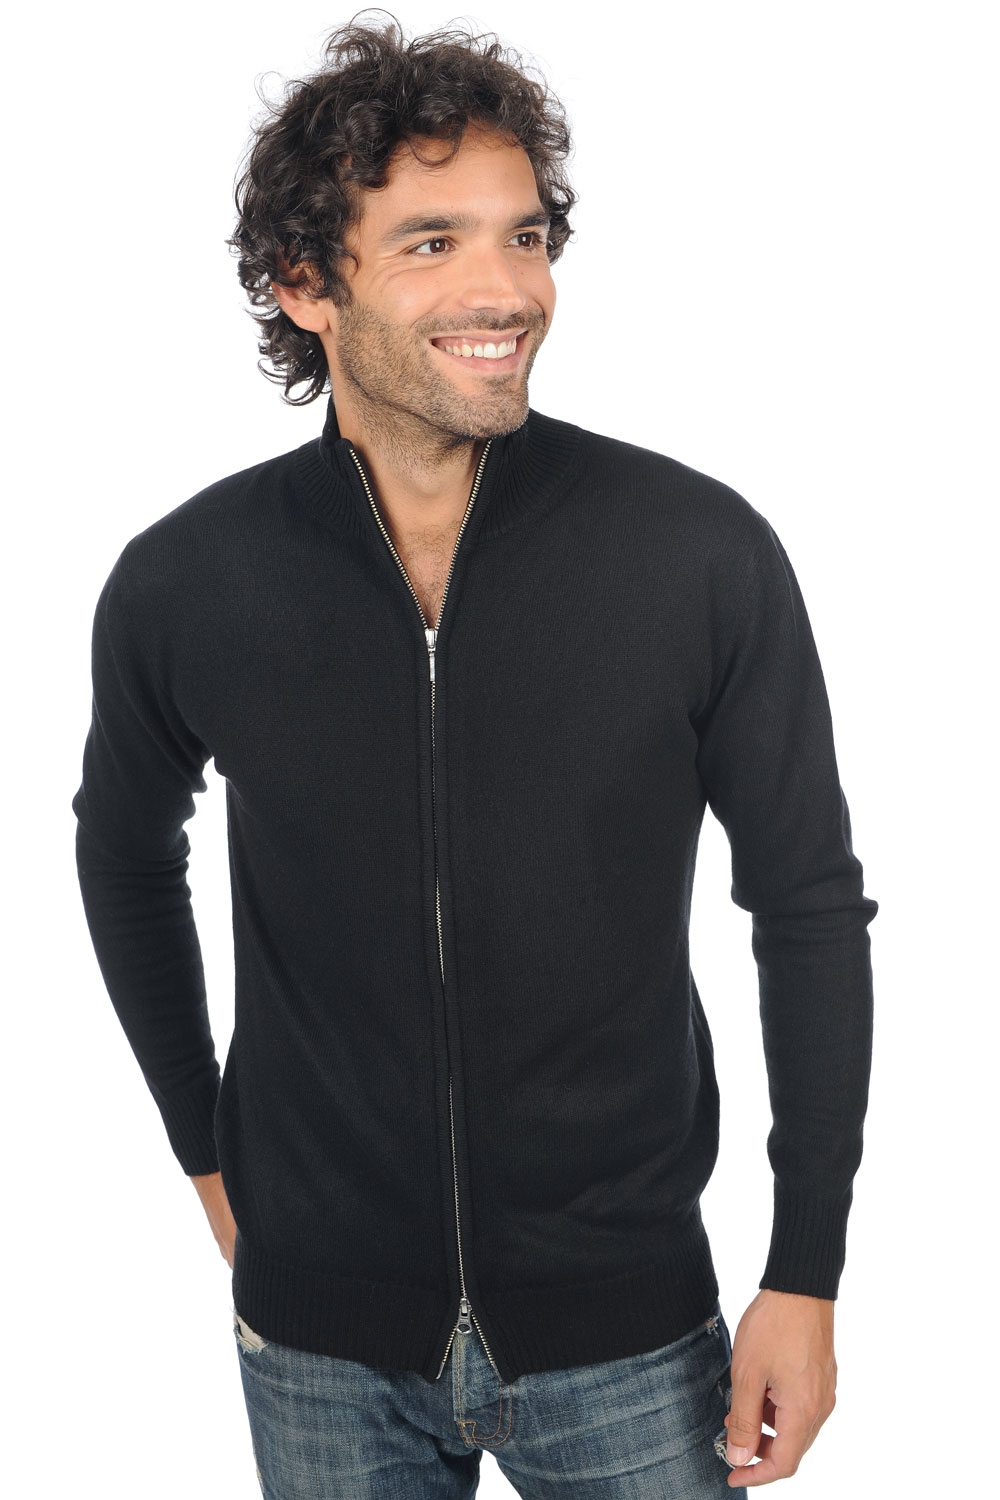 Cashmere men basic sweaters at low prices thobias first black m